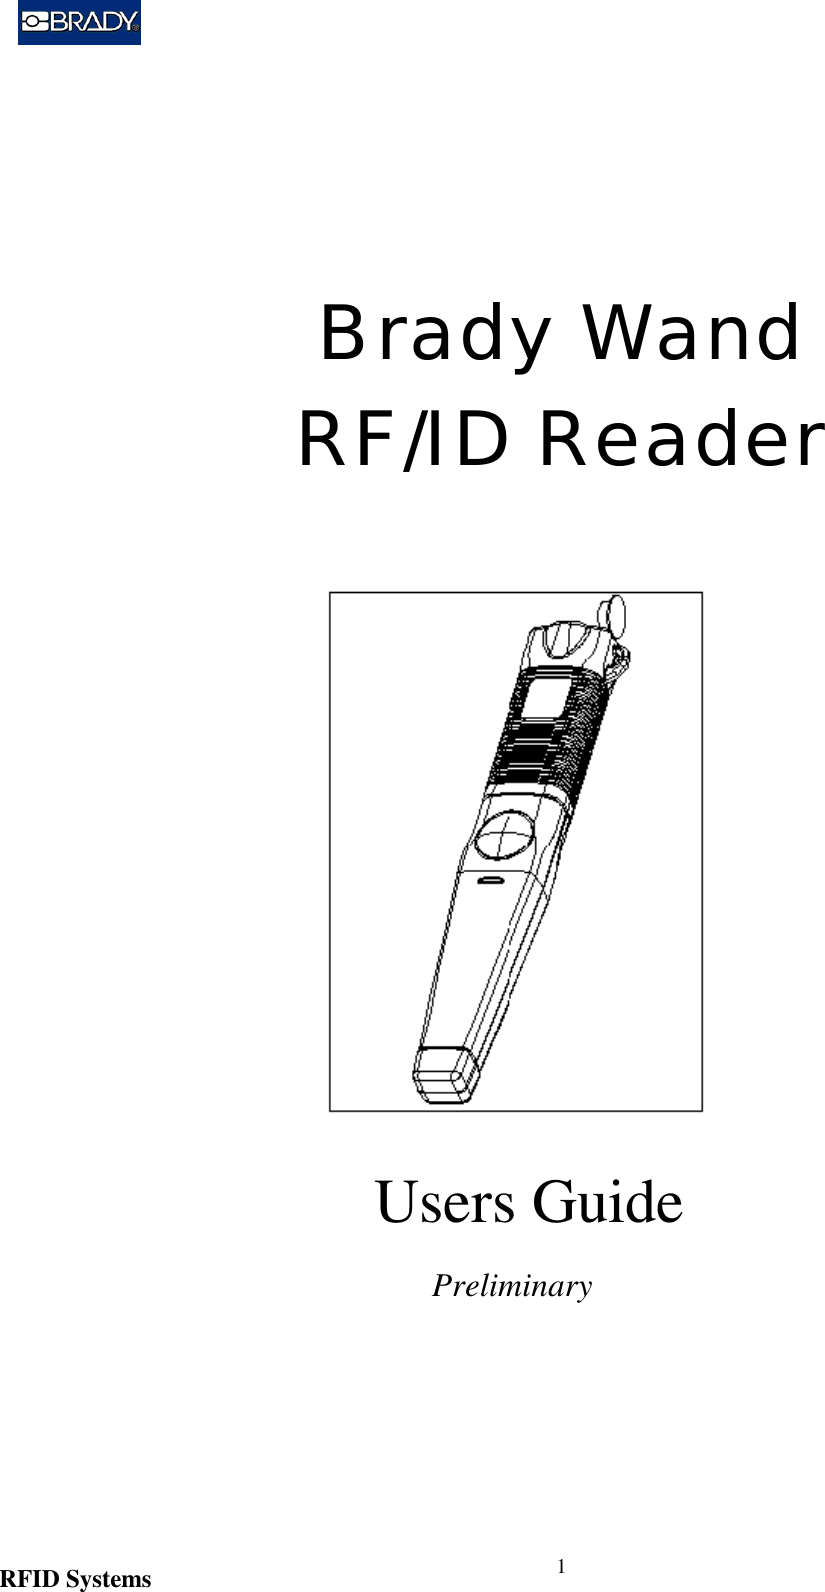 RFID Systems 1Brady WandRF/ID Reader                                                            Users Guide       Preliminary